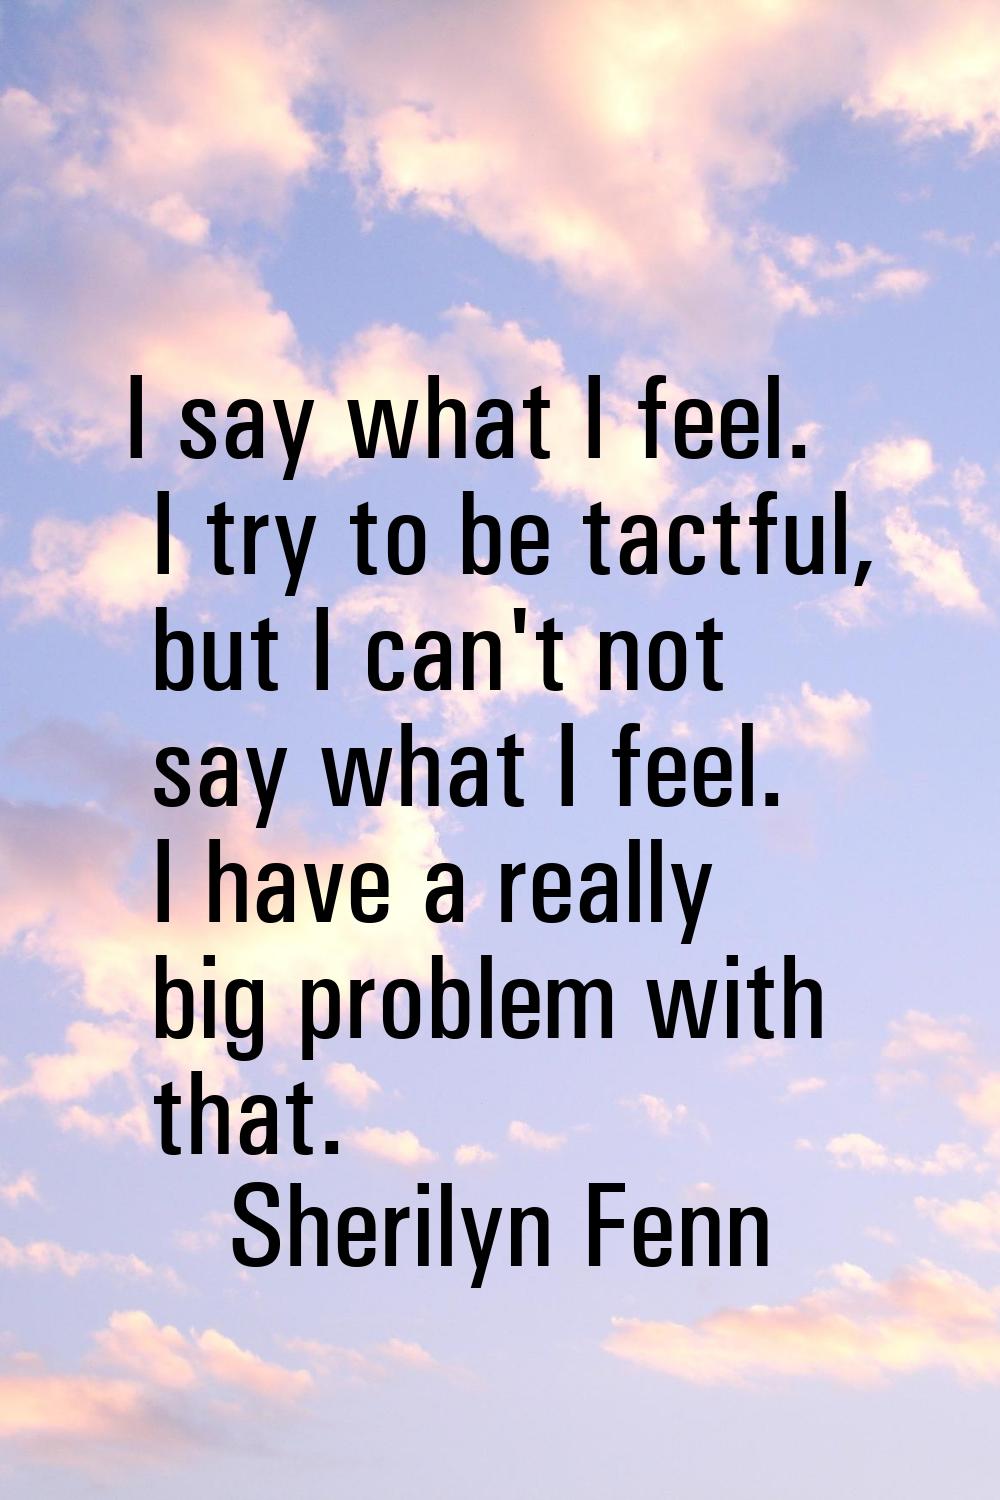 I say what I feel. I try to be tactful, but I can't not say what I feel. I have a really big proble